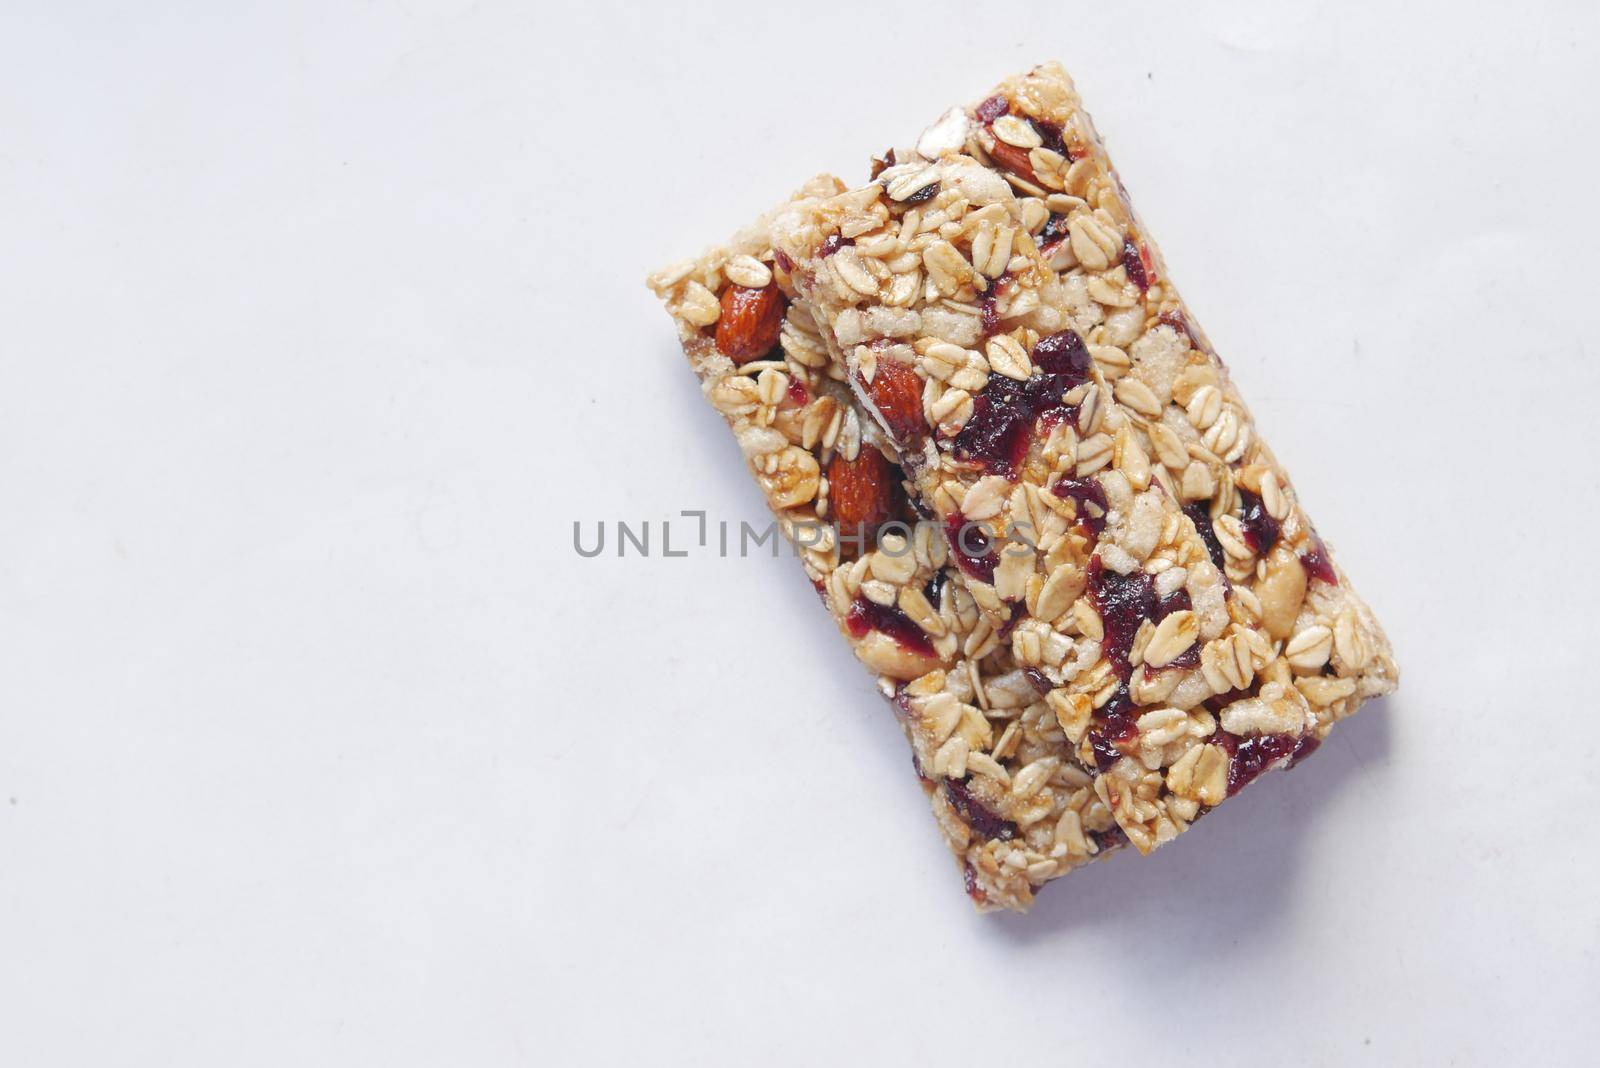 Almond , Raisin and oat protein bars on white background .,